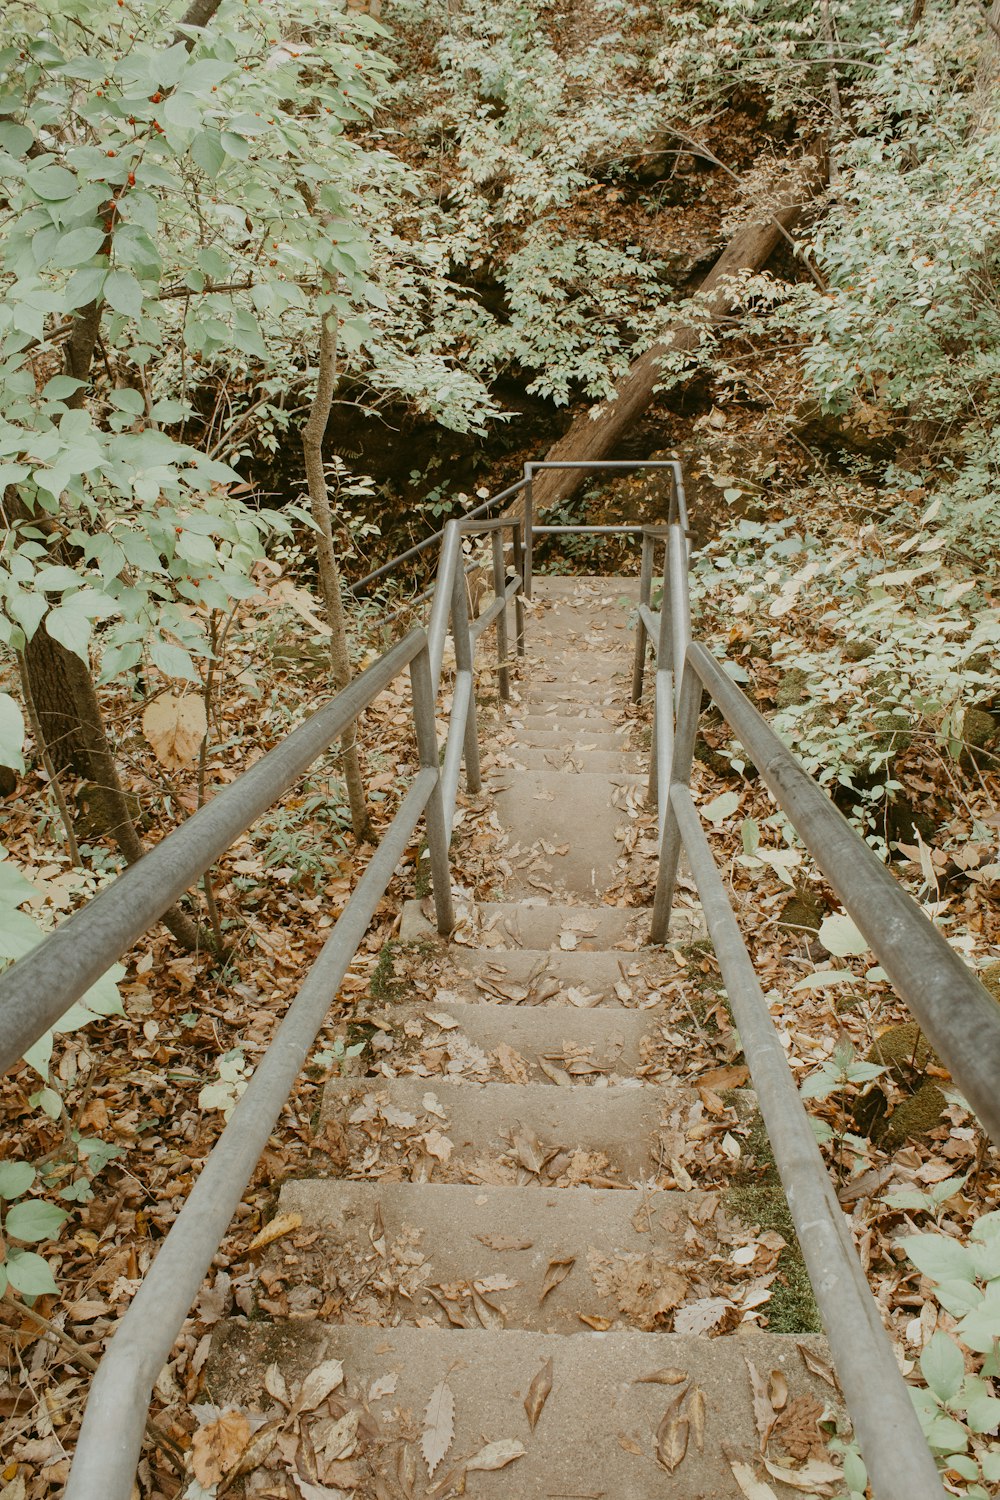 brown wooden staircase in forest during daytime